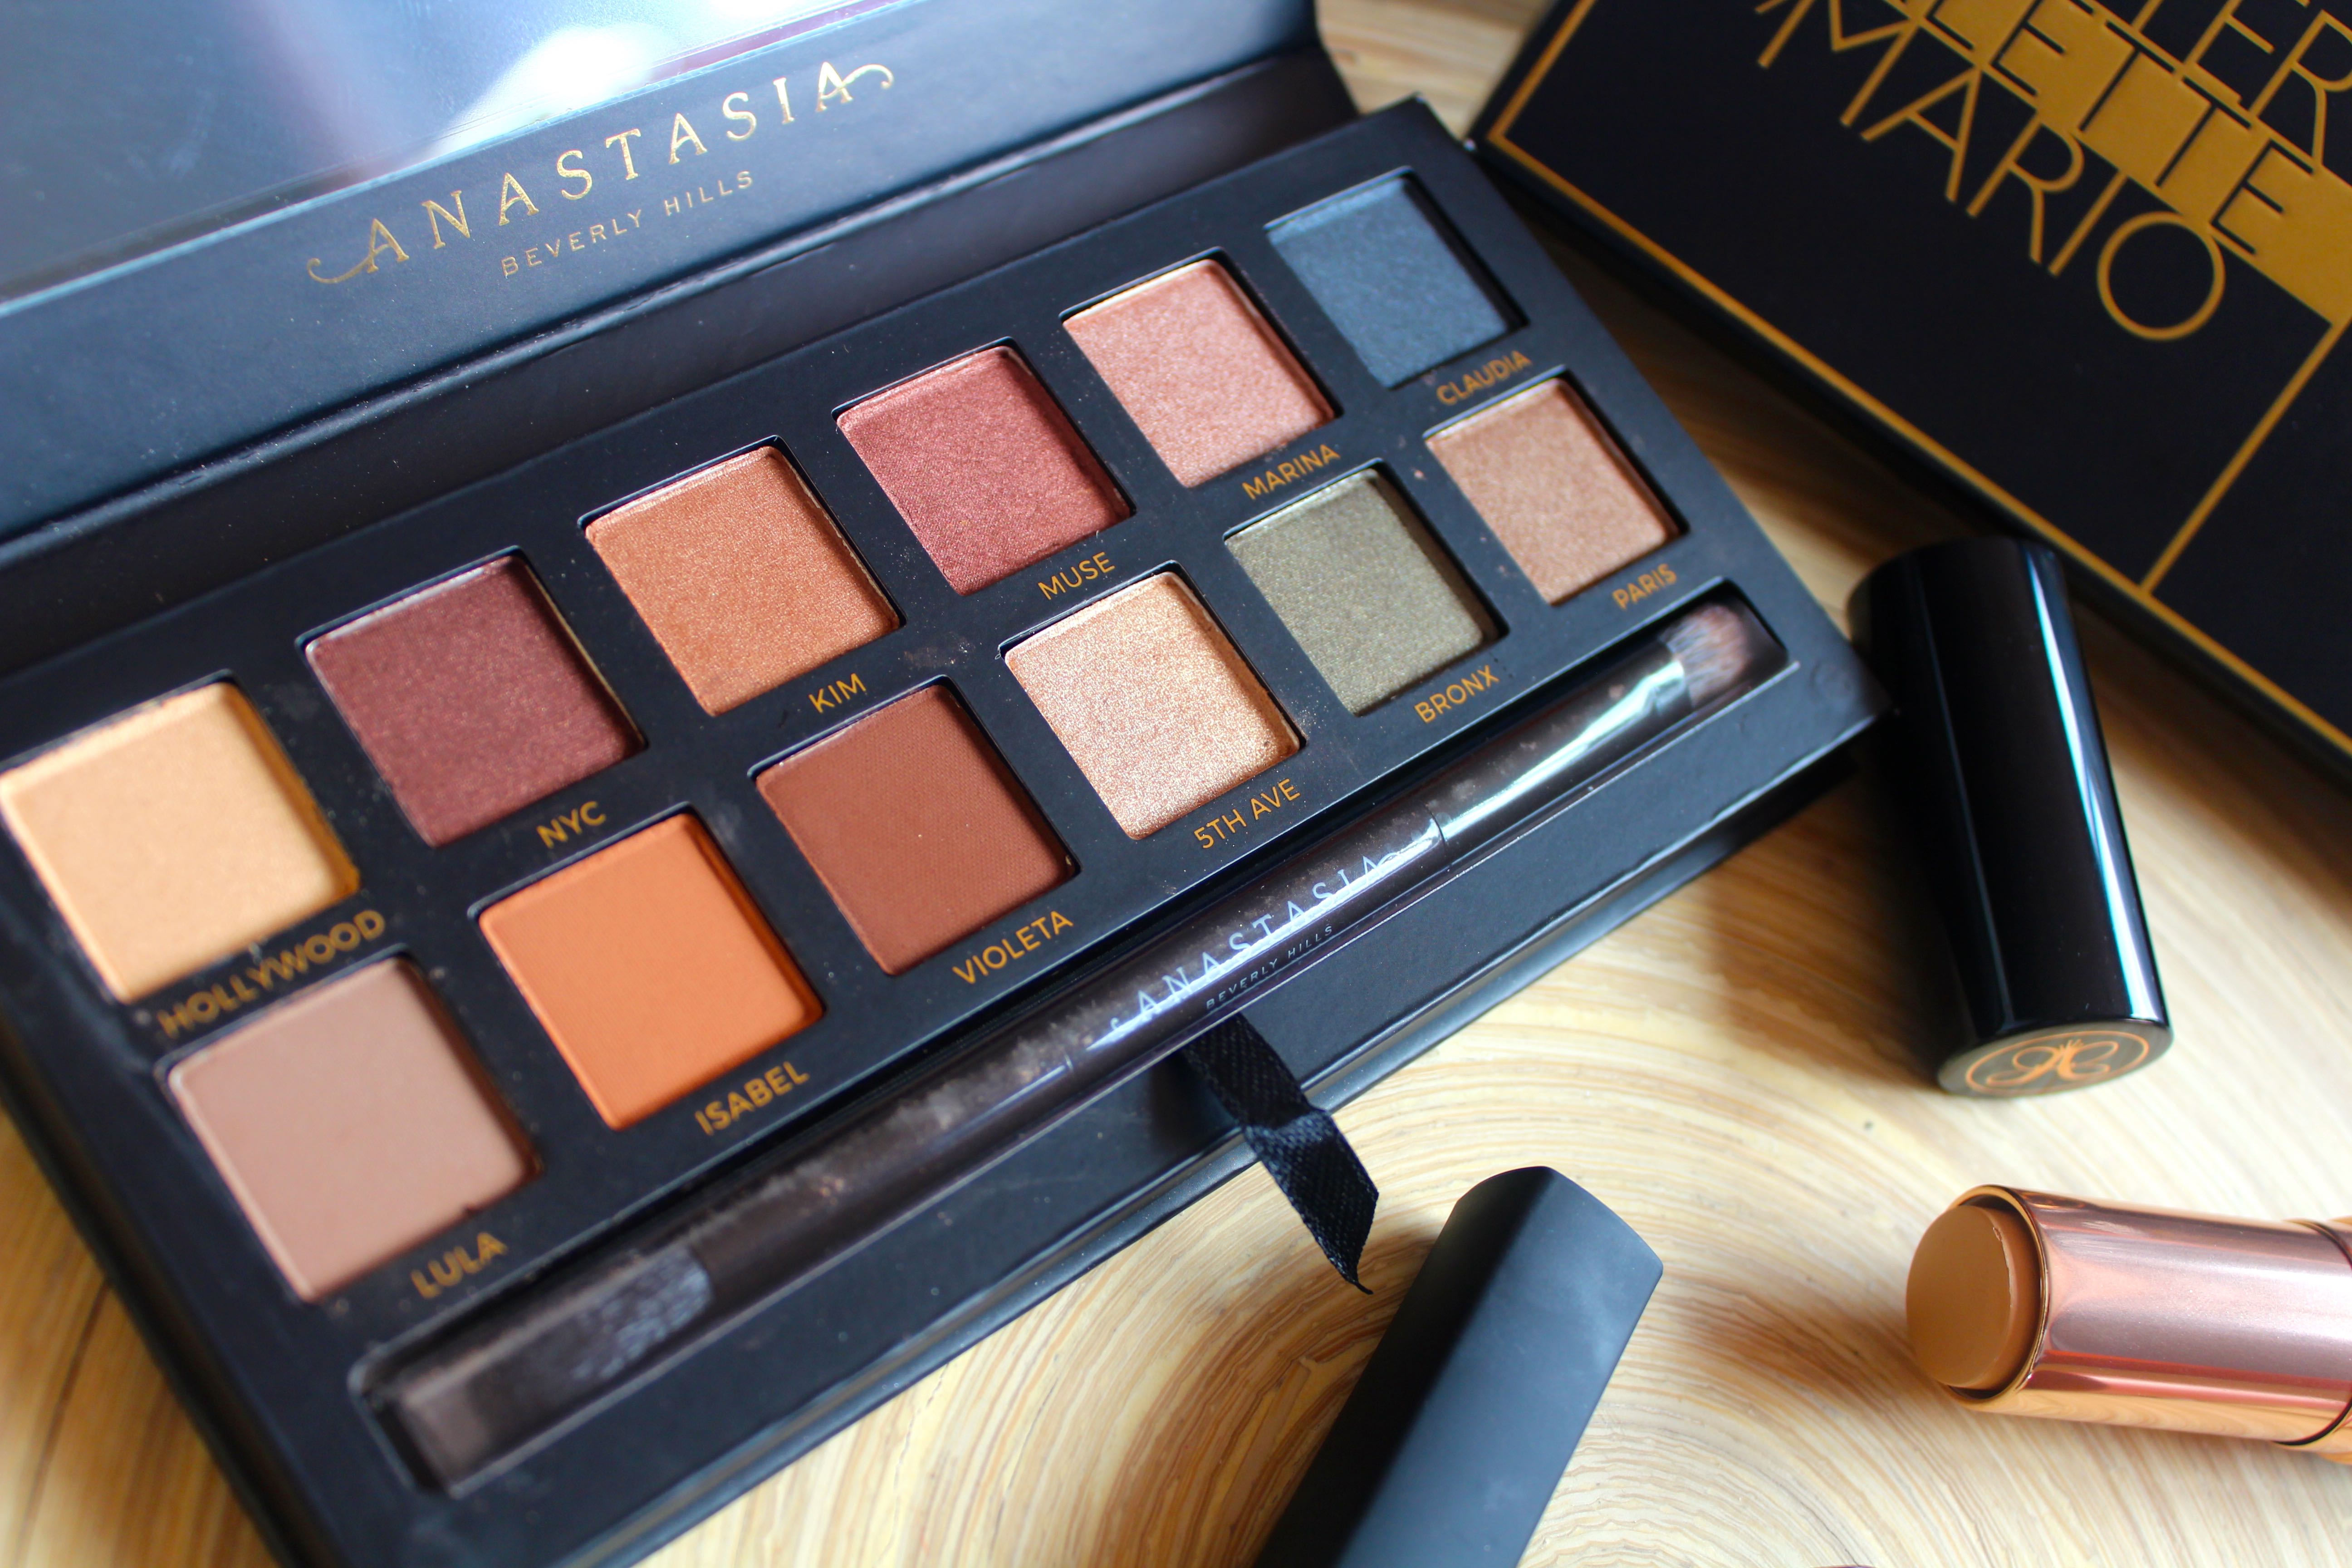 Anastasia Beverly Hills Master Palette by Mario Review & Swatches by Facemadeup.com